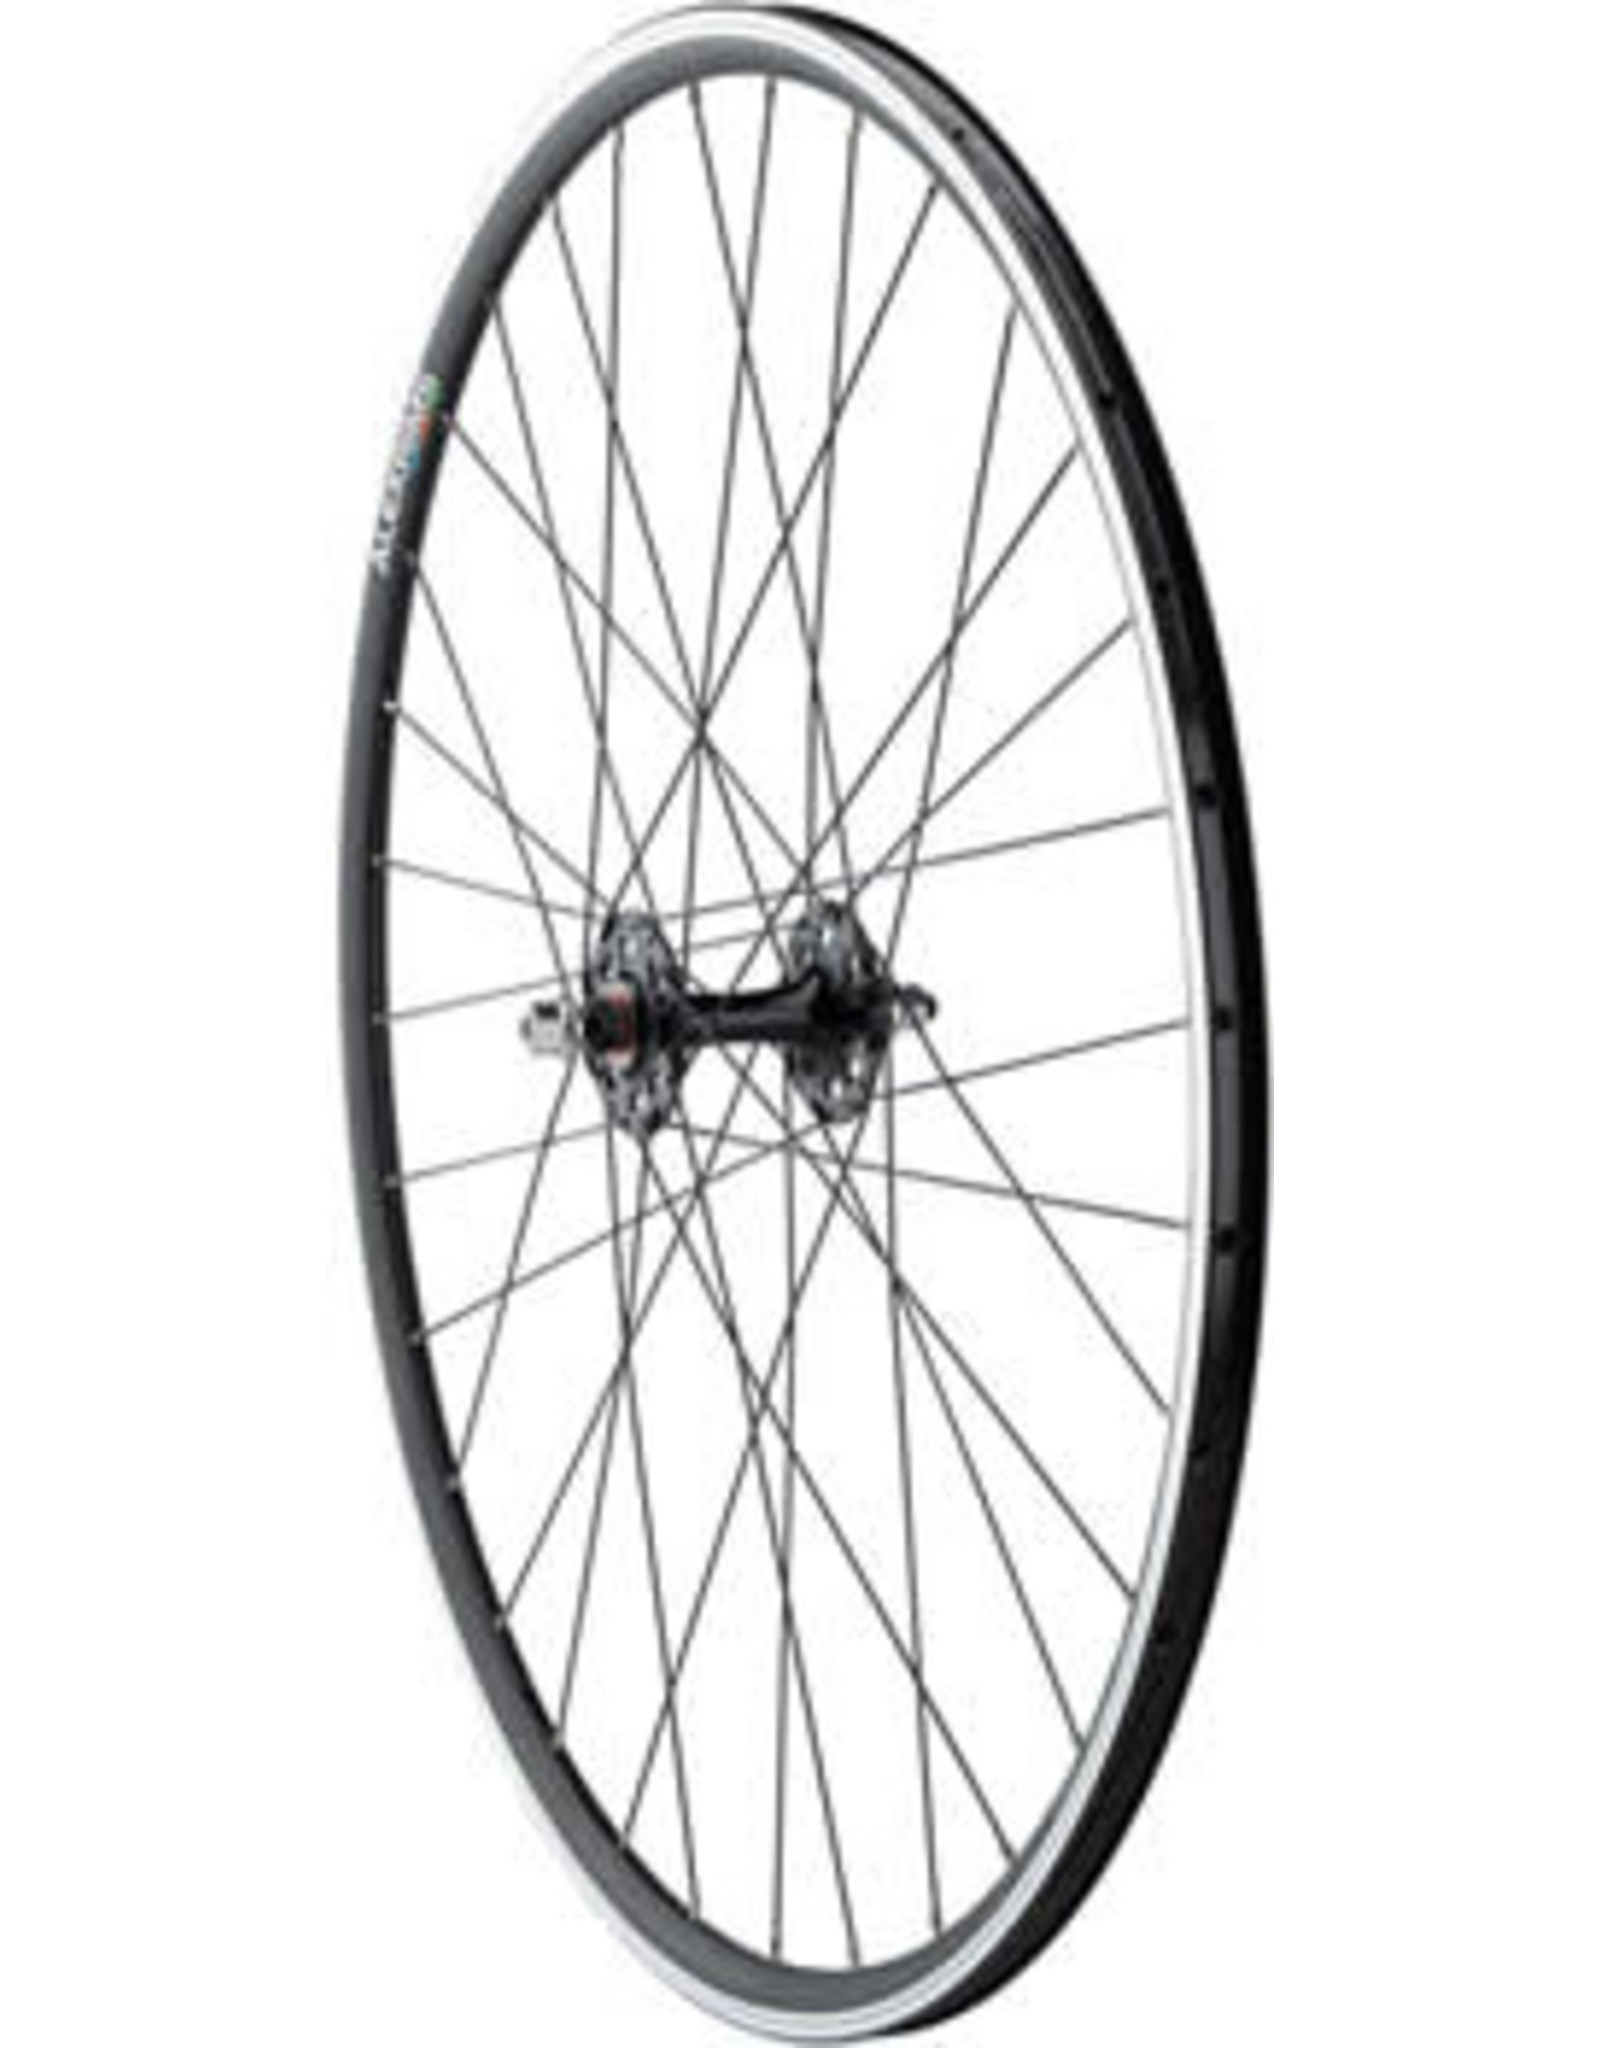 Quality Wheels Quality Wheels Value Double Wall Series Track Front Front Wheel - 700, 9x1 Threaded x 100mm, Rim Brake, Black, Clincher